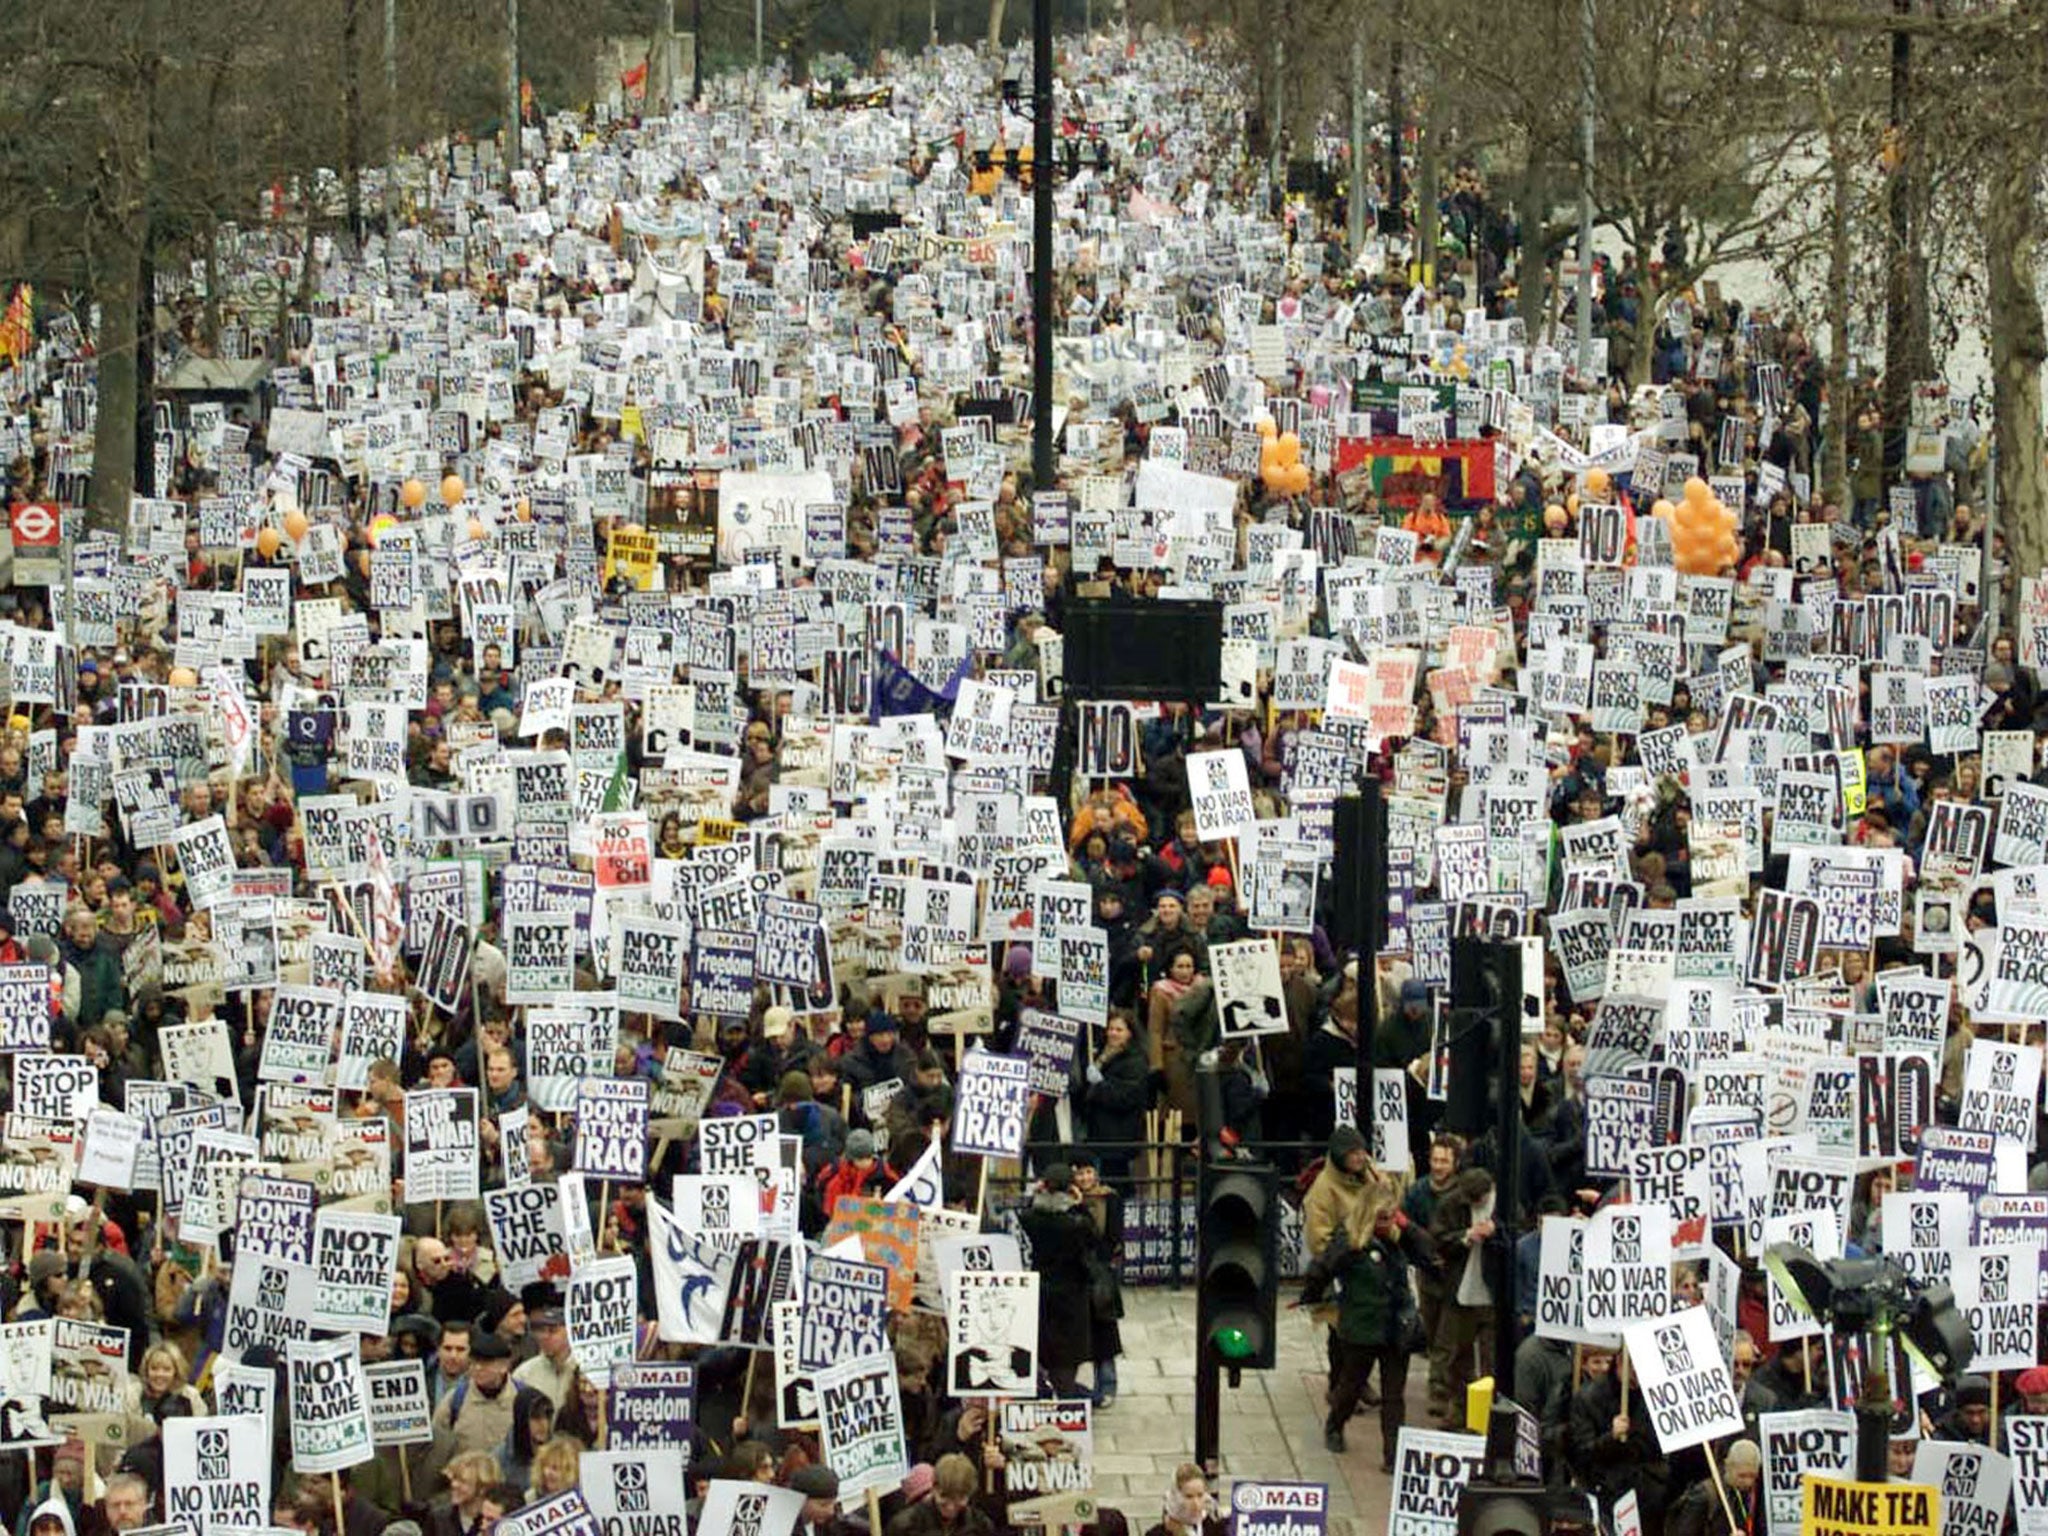 The ‘Stop the War’ march on 15 February 2003